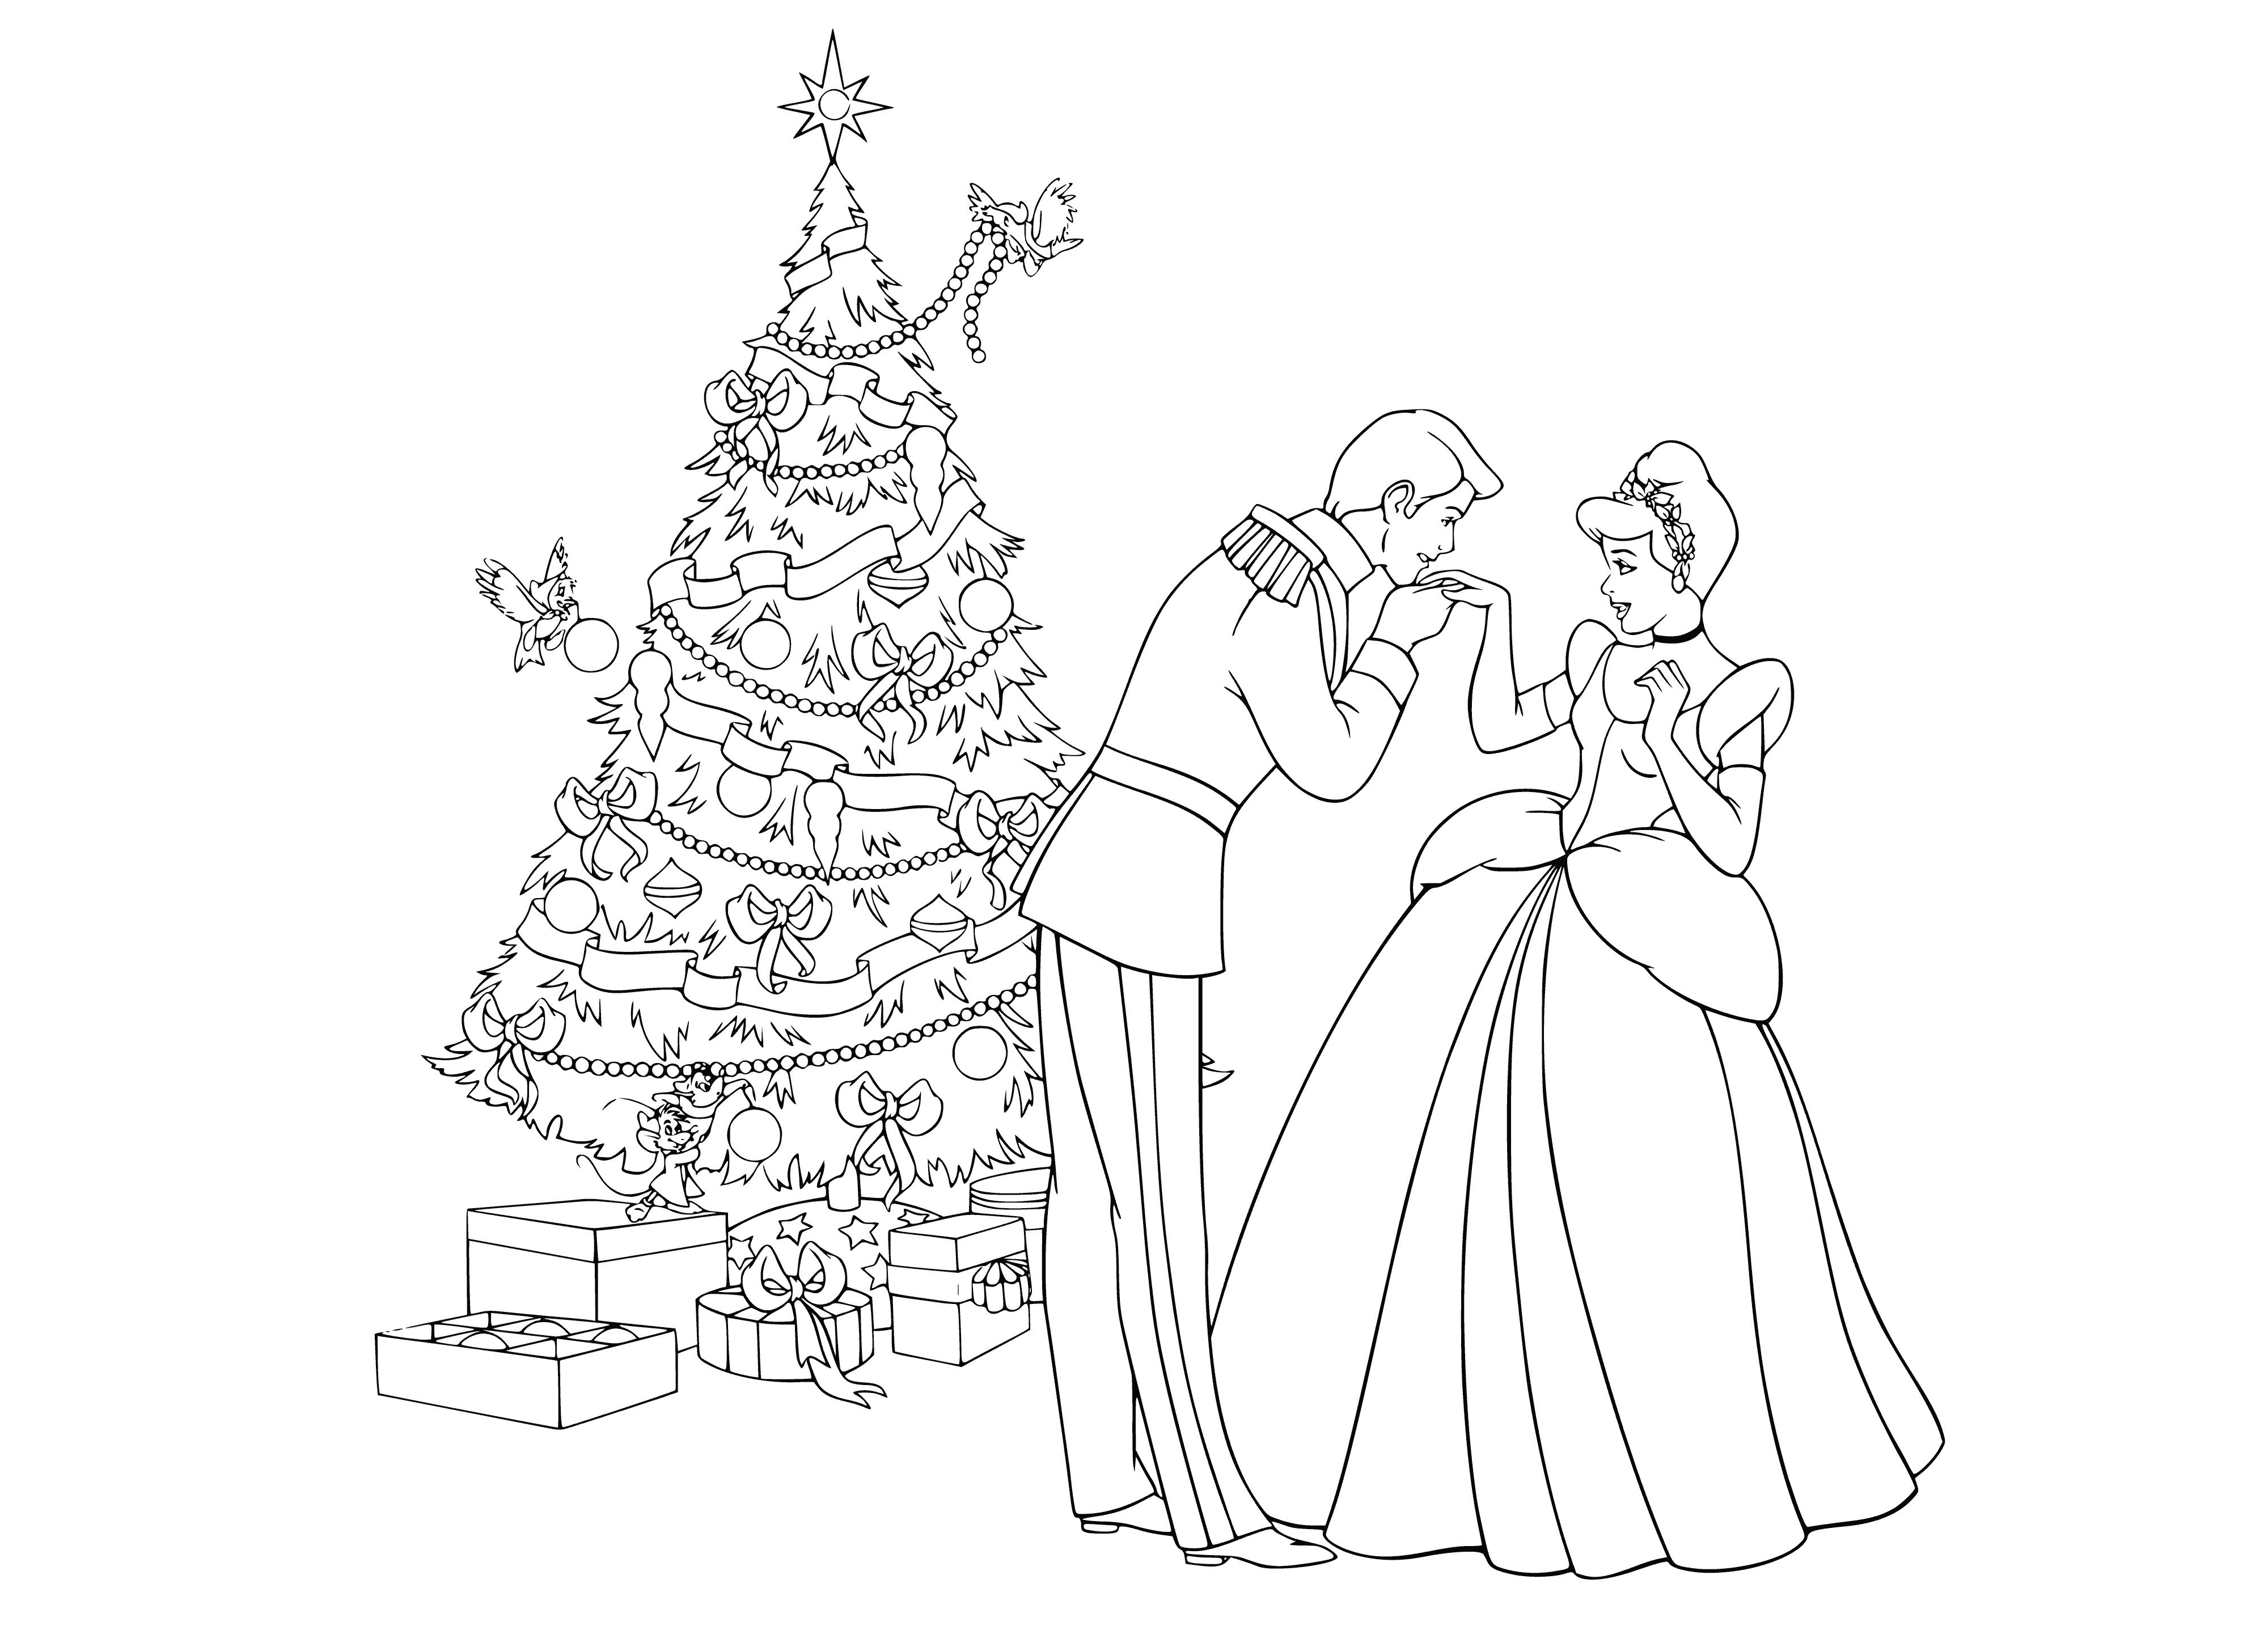 Cinderella and the prince at the Christmas tree coloring page